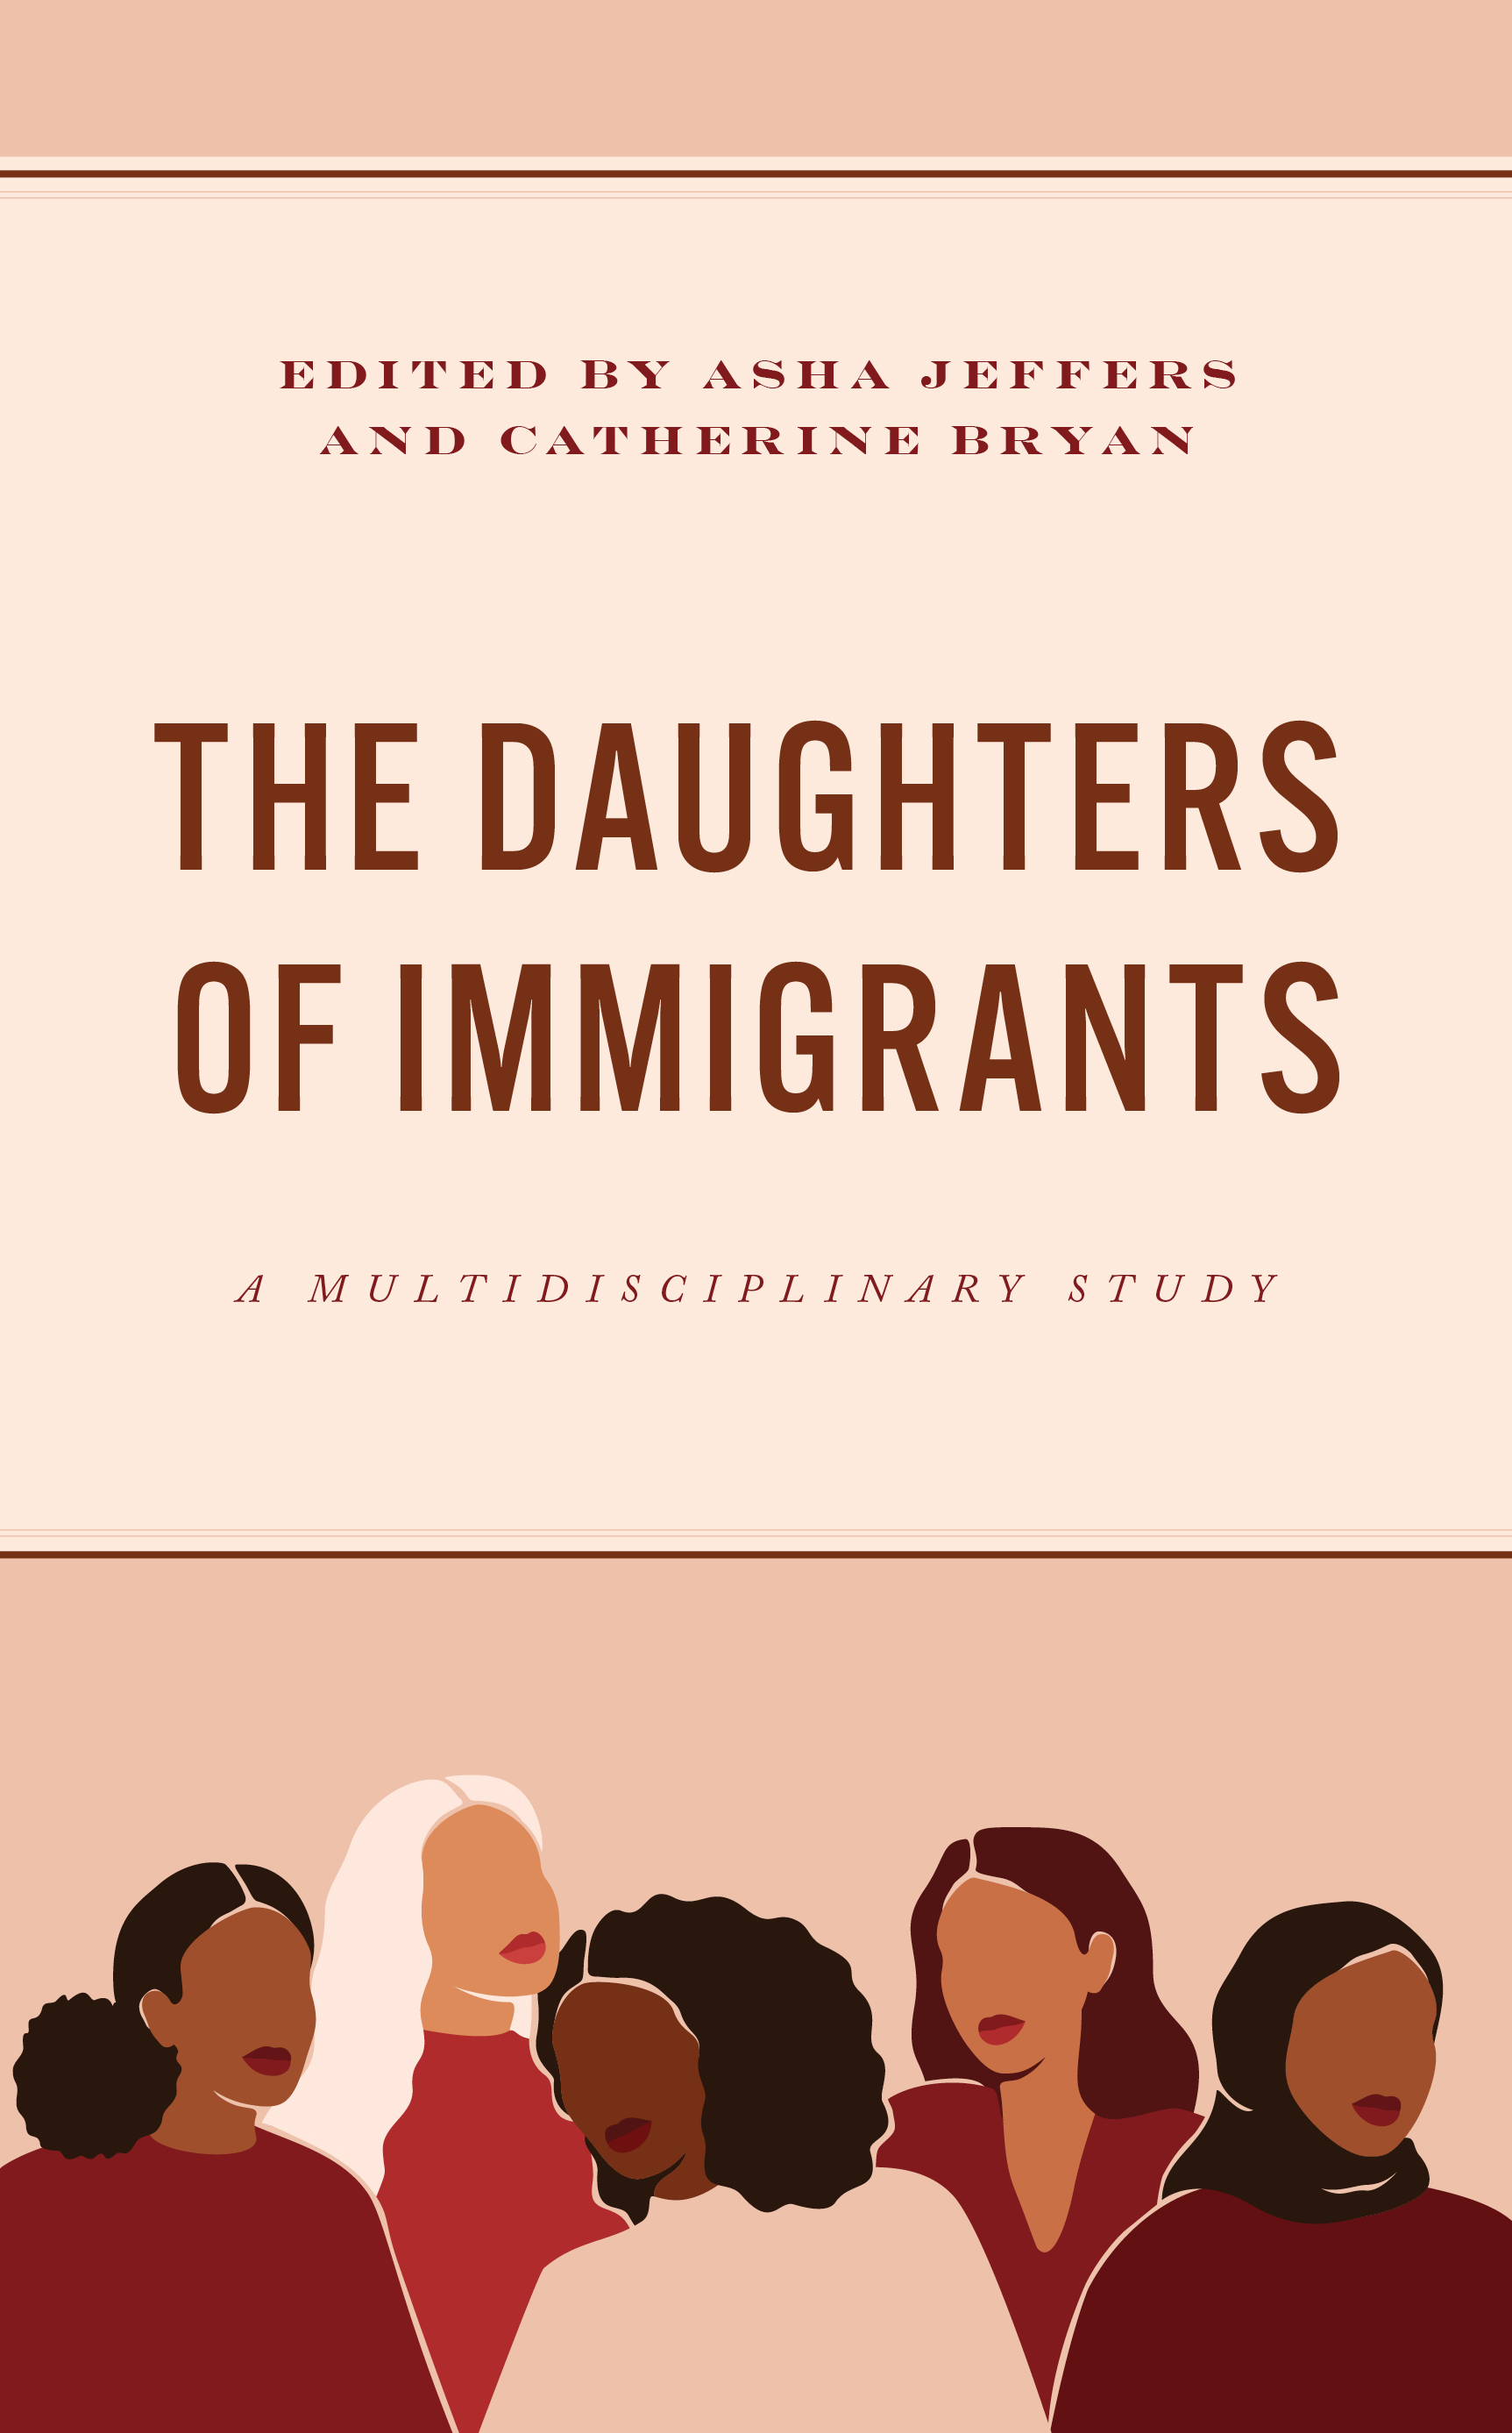 The Daughters of Immigrants: A Multidisciplinary Study